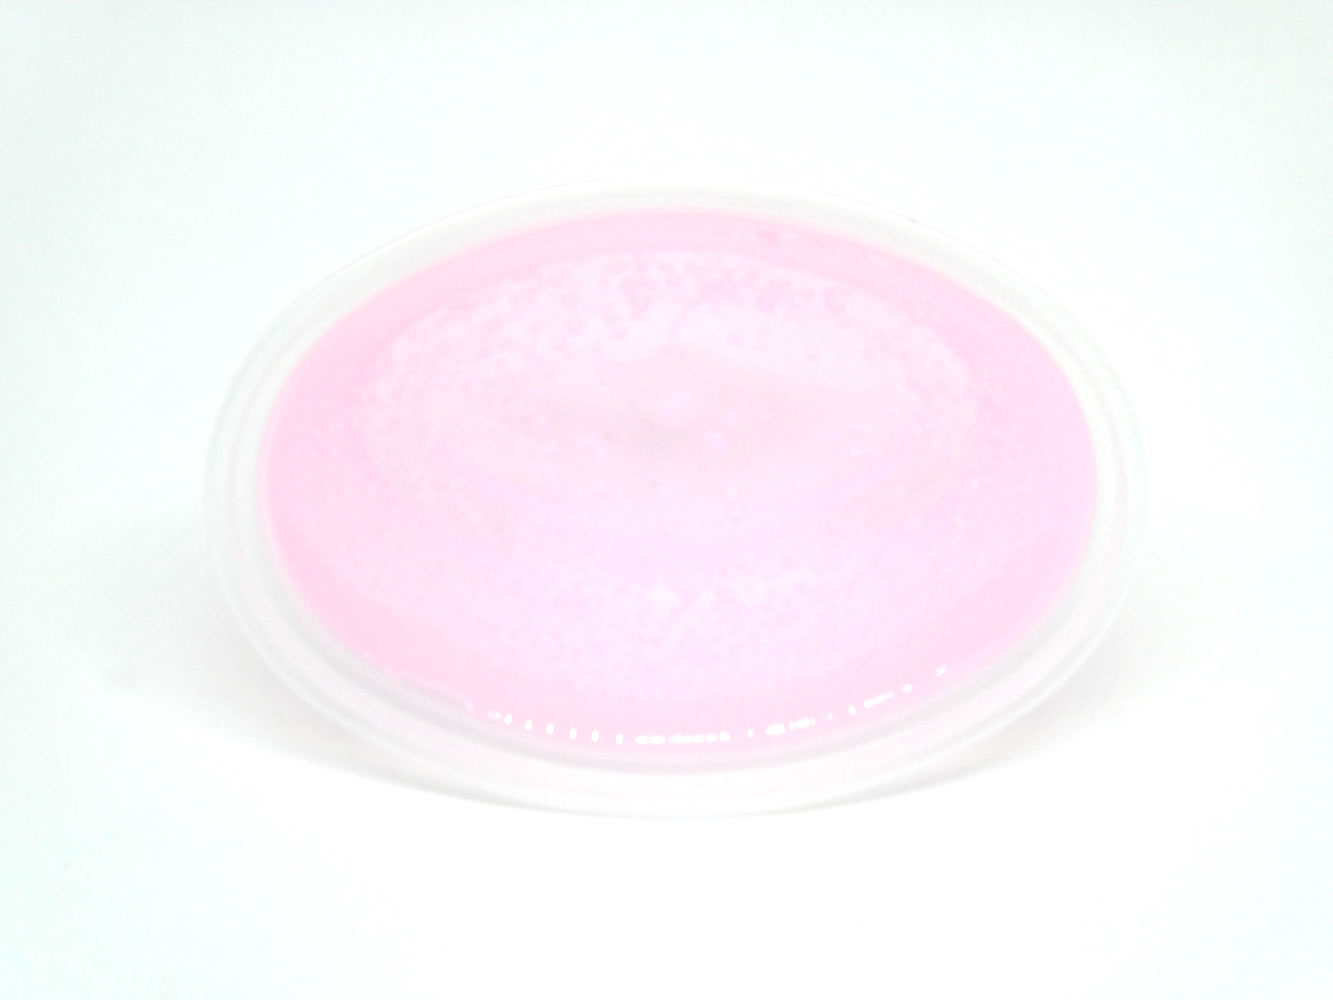 Pink Ice Inspired Scented Gel Melts™ for warmer 3 pack